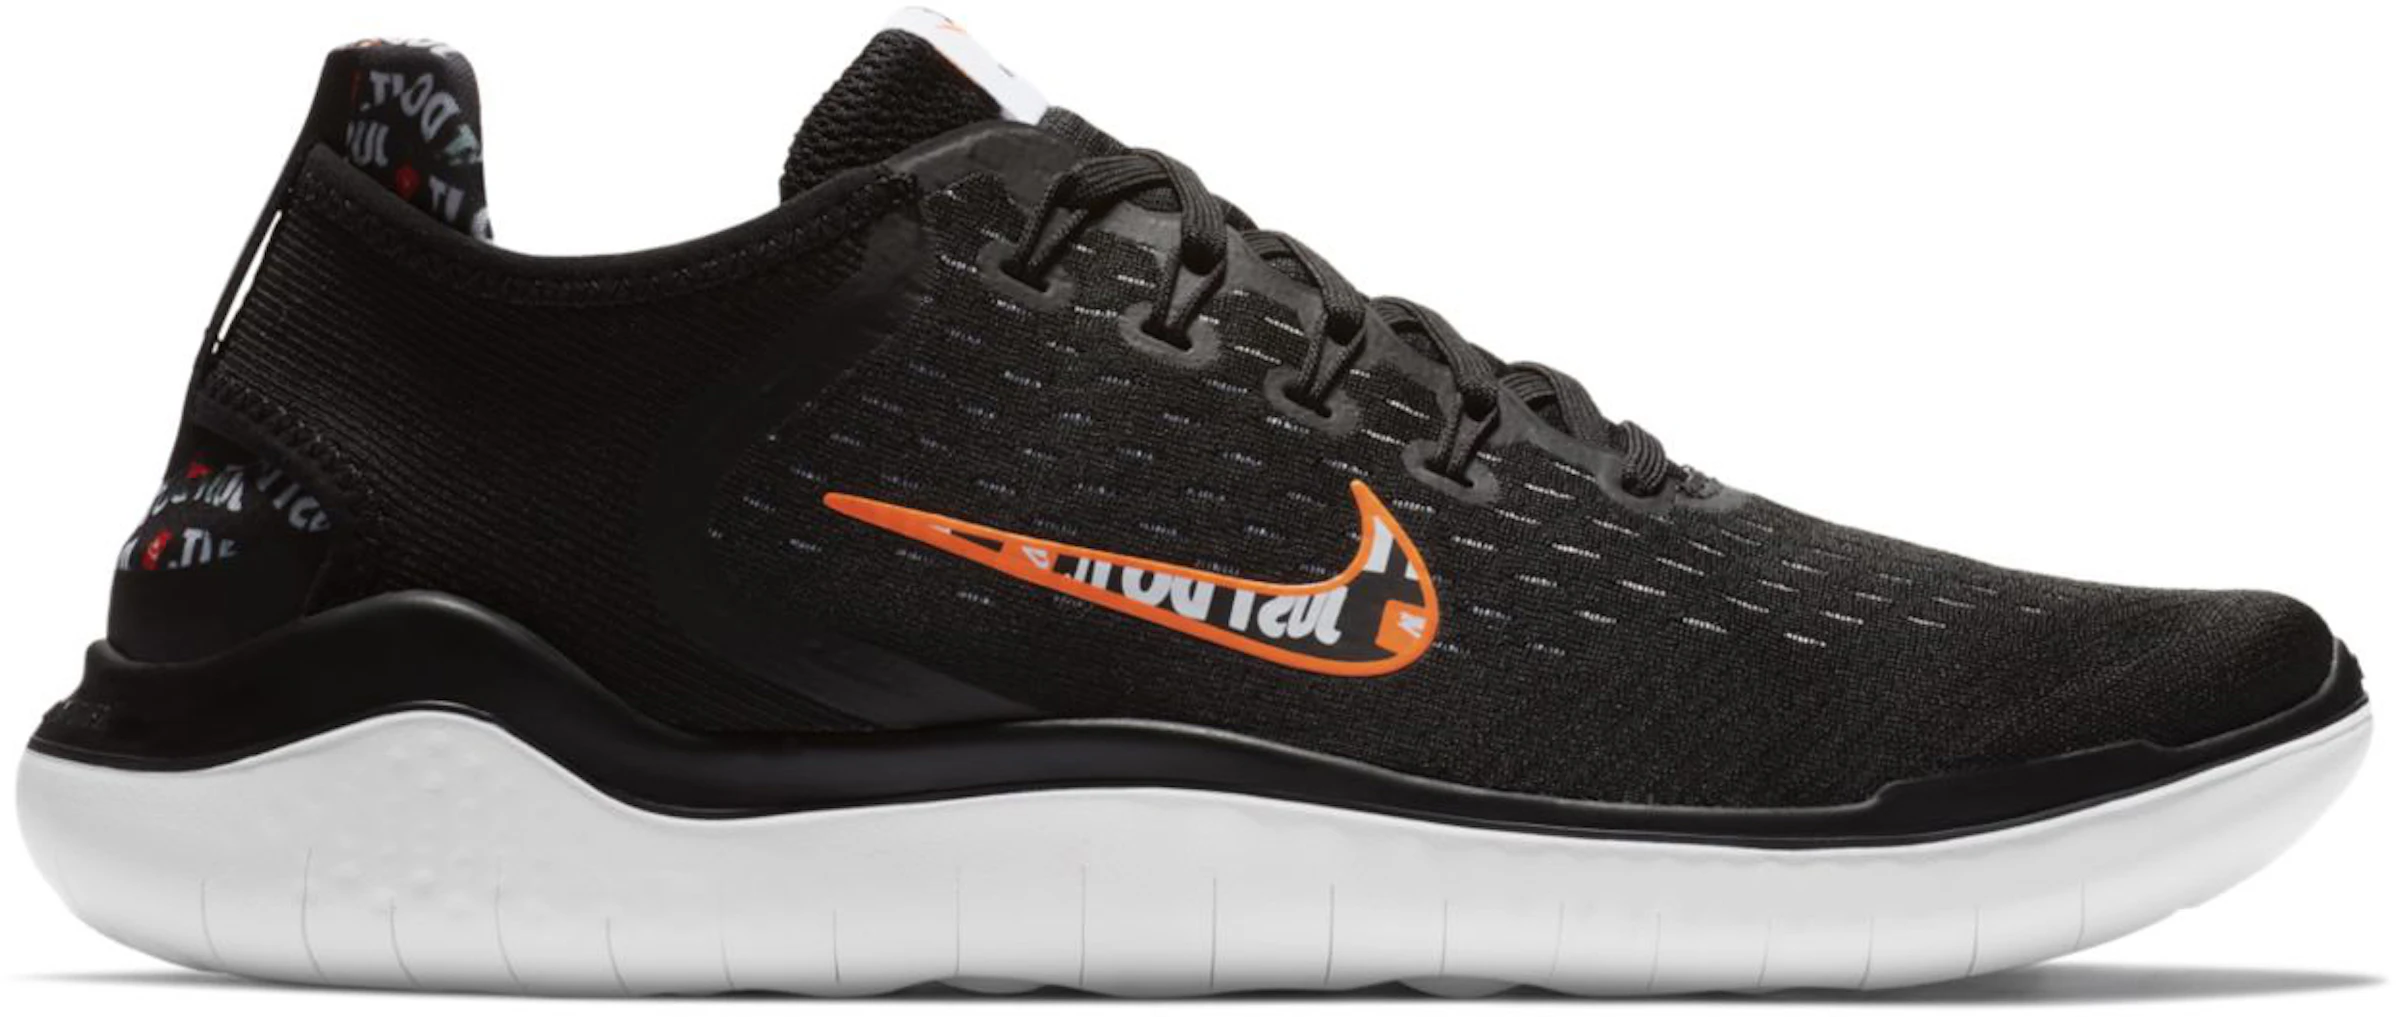 experimental Deseo Alrededores Nike Free RN 2018 Just Do It - AT4246-001 - ES